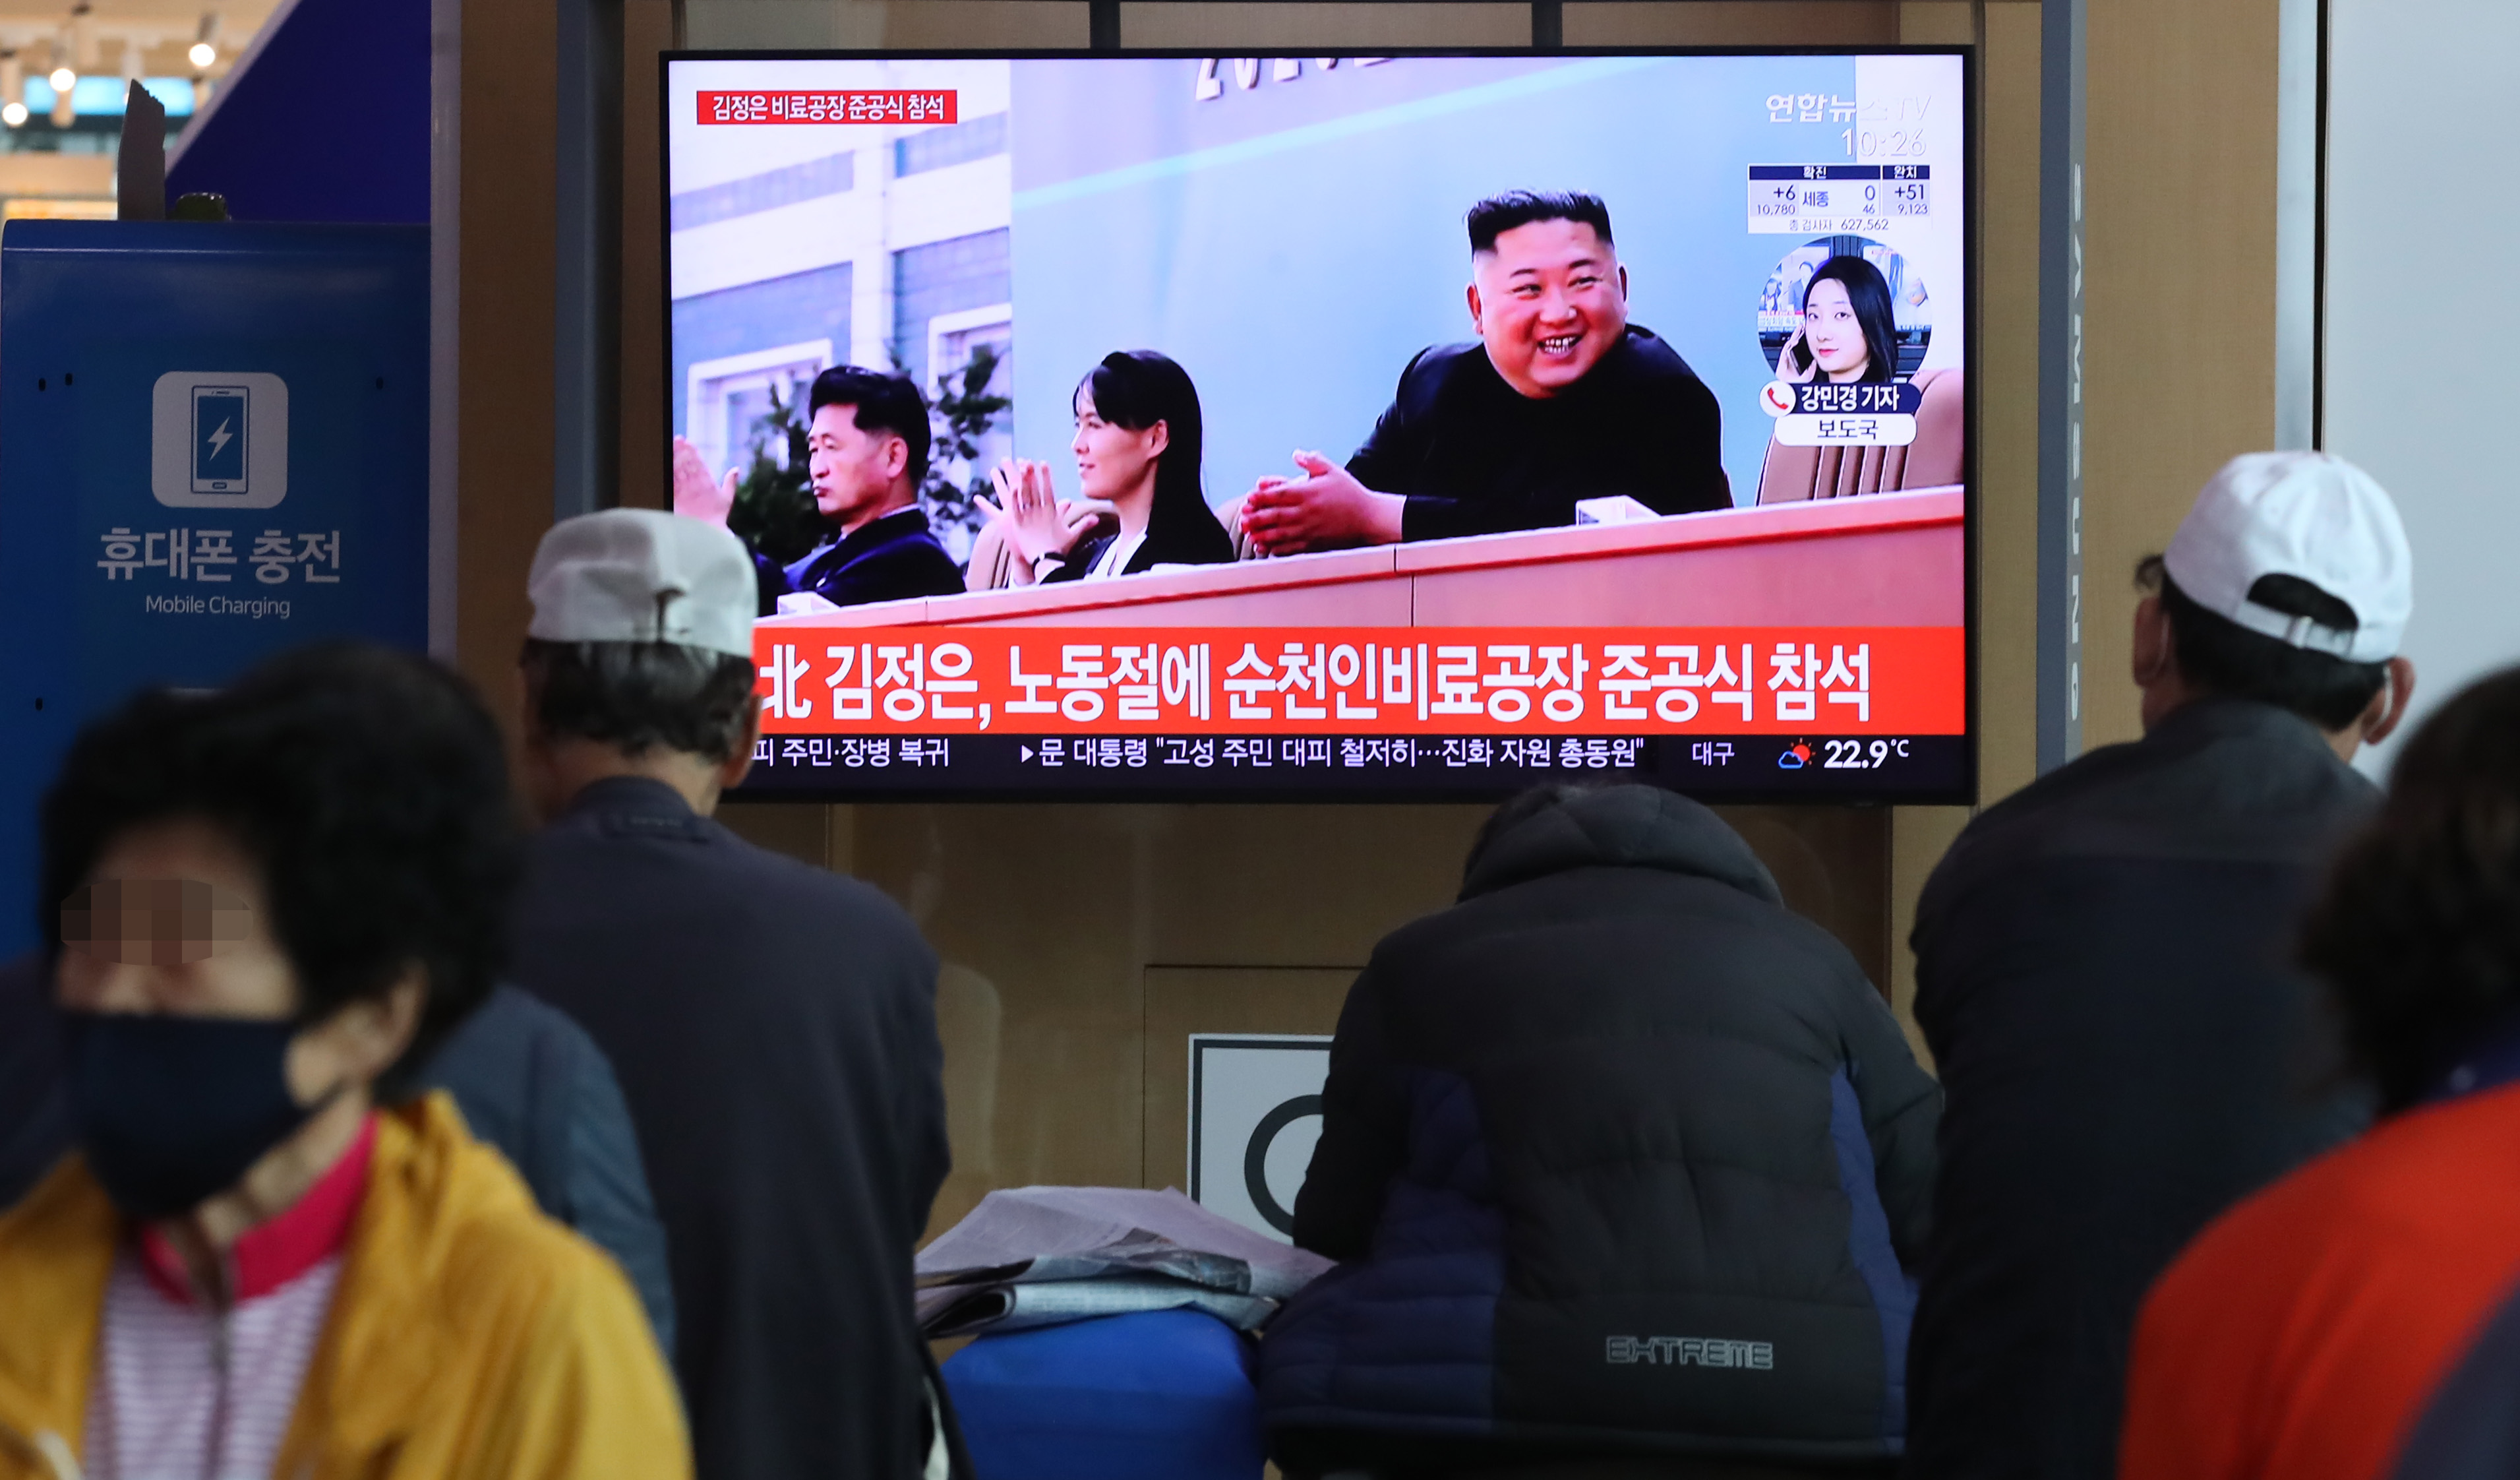 Kim Jong-un appears not to have undergone surgery: Cheong Wa Dae